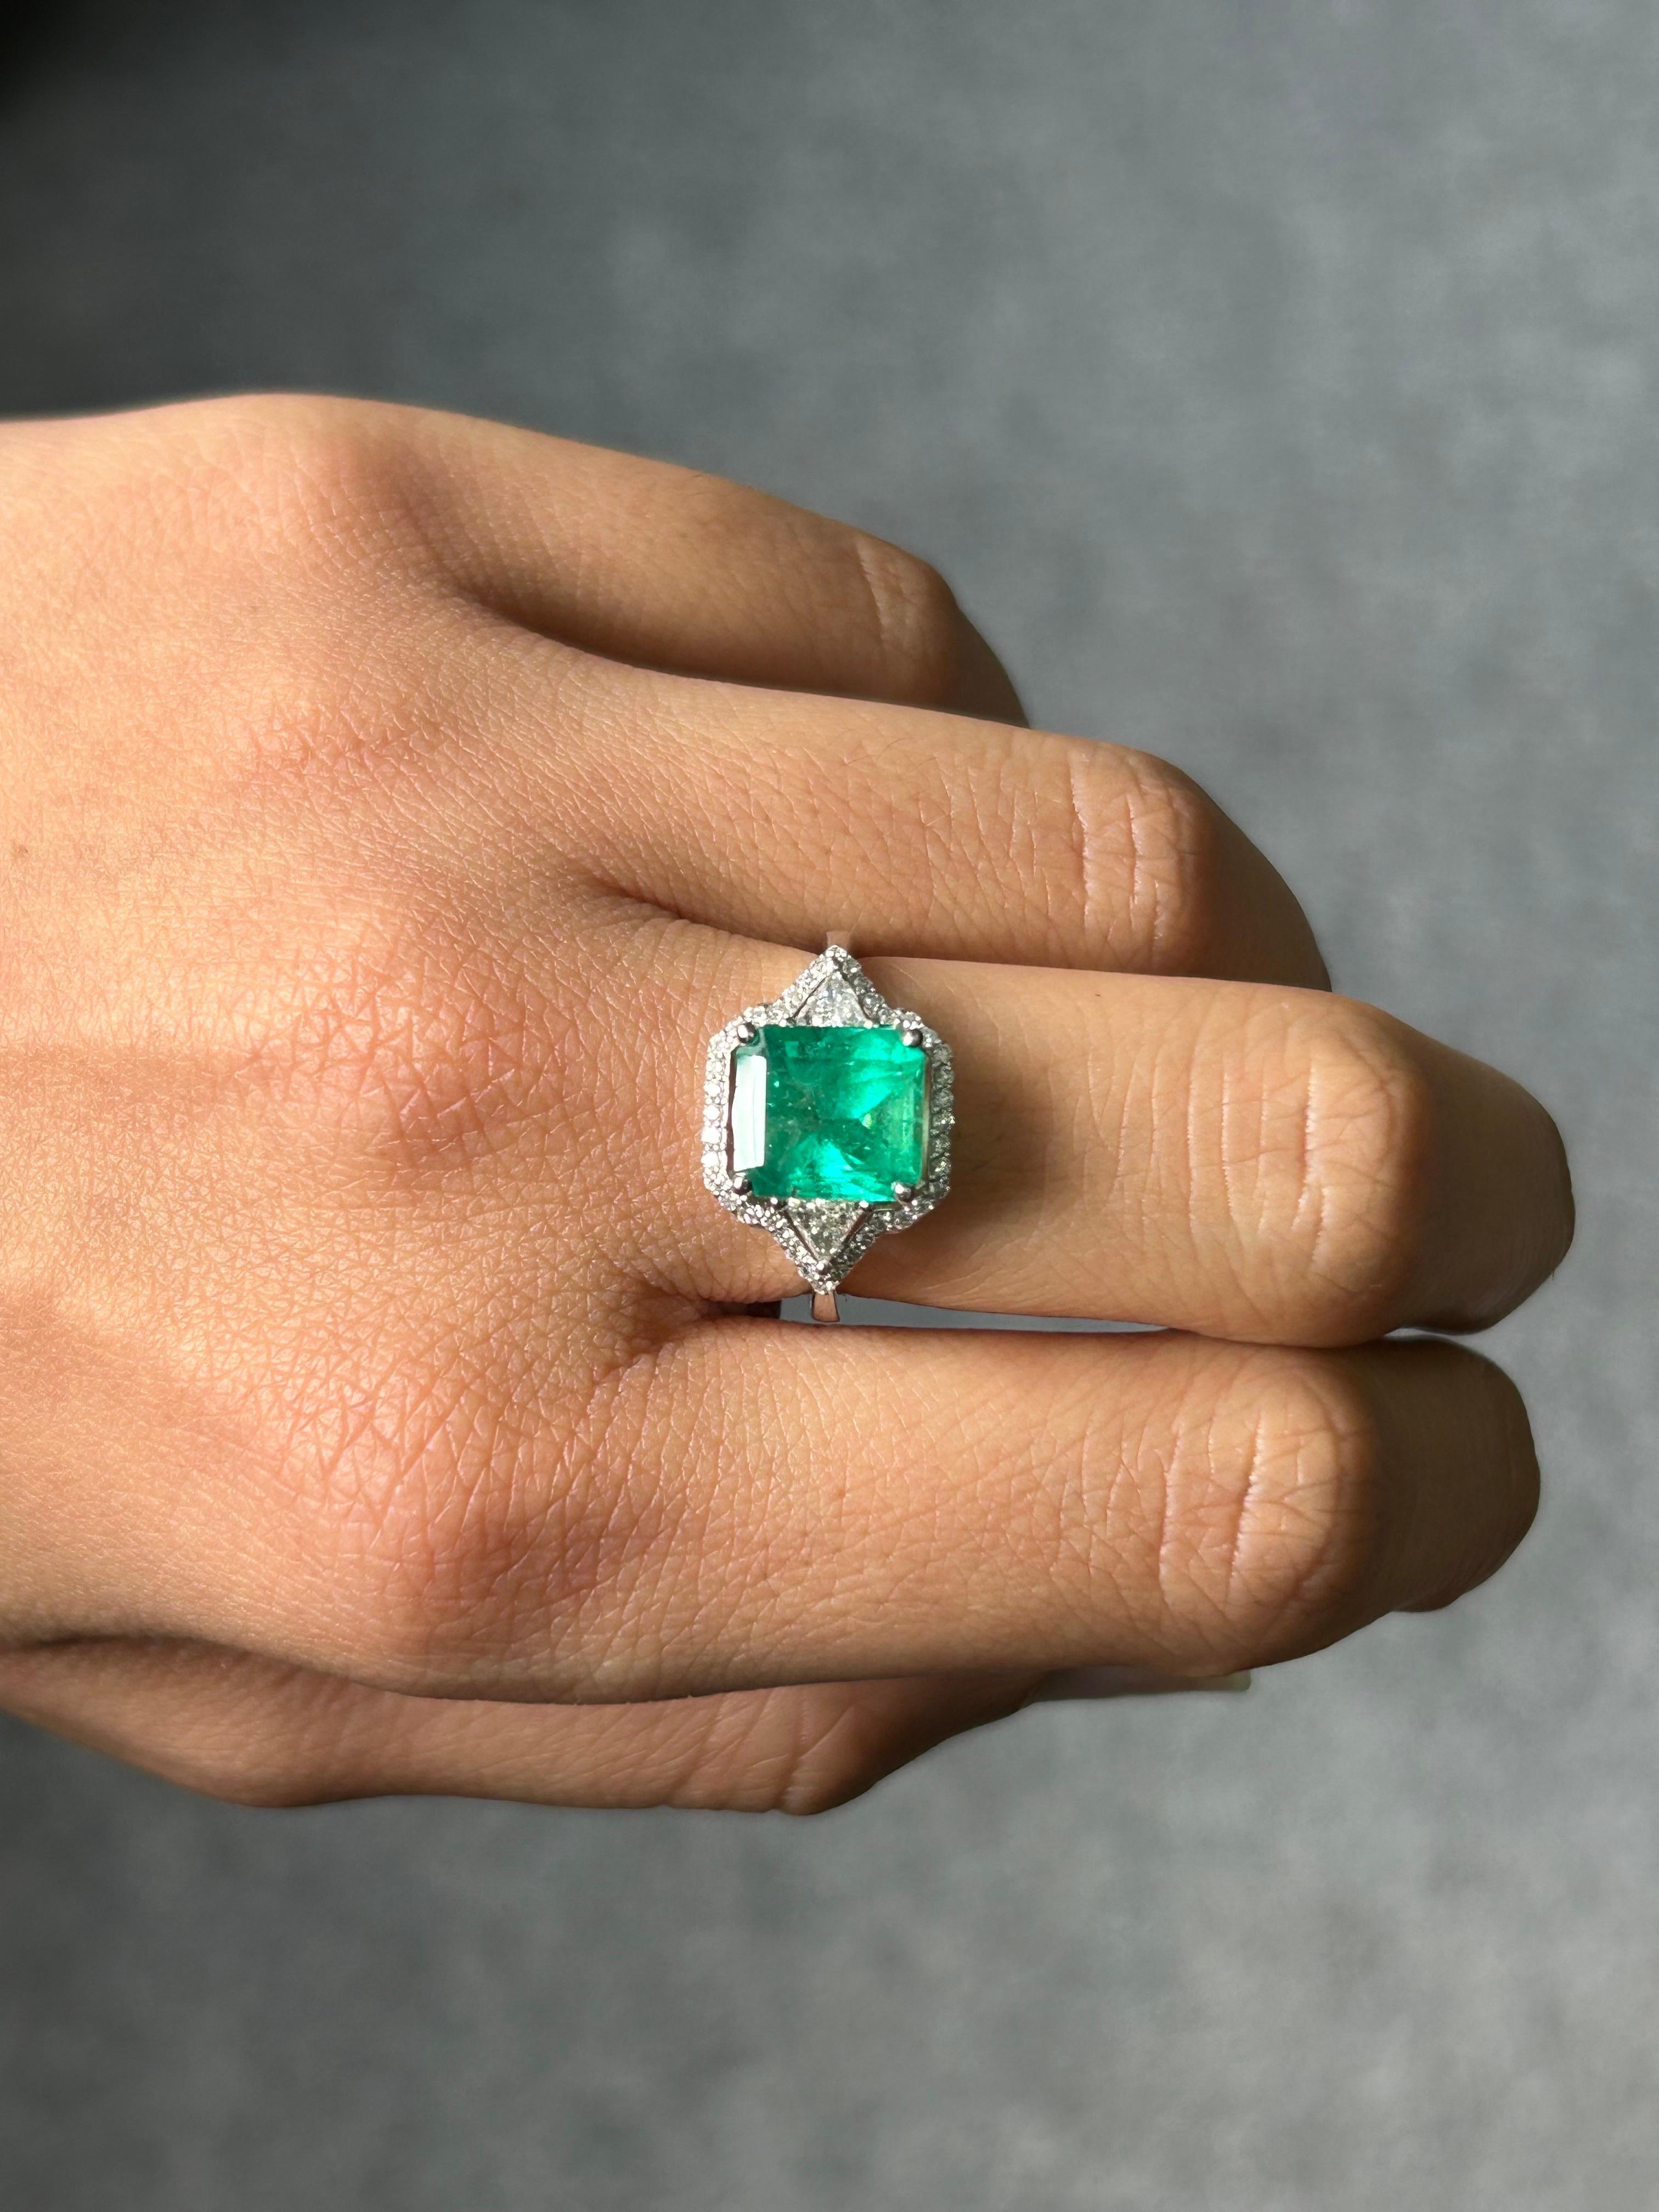 A certified vibrant, vivid green 2.36 carat emerald cut Colombian Emerald and 0.2 carat VS quality Trillion Diamond and 0.22 carat round Diamond halo three stone, engagement ring. The stones are set in 18K White Gold. 

A classic three stone ring,